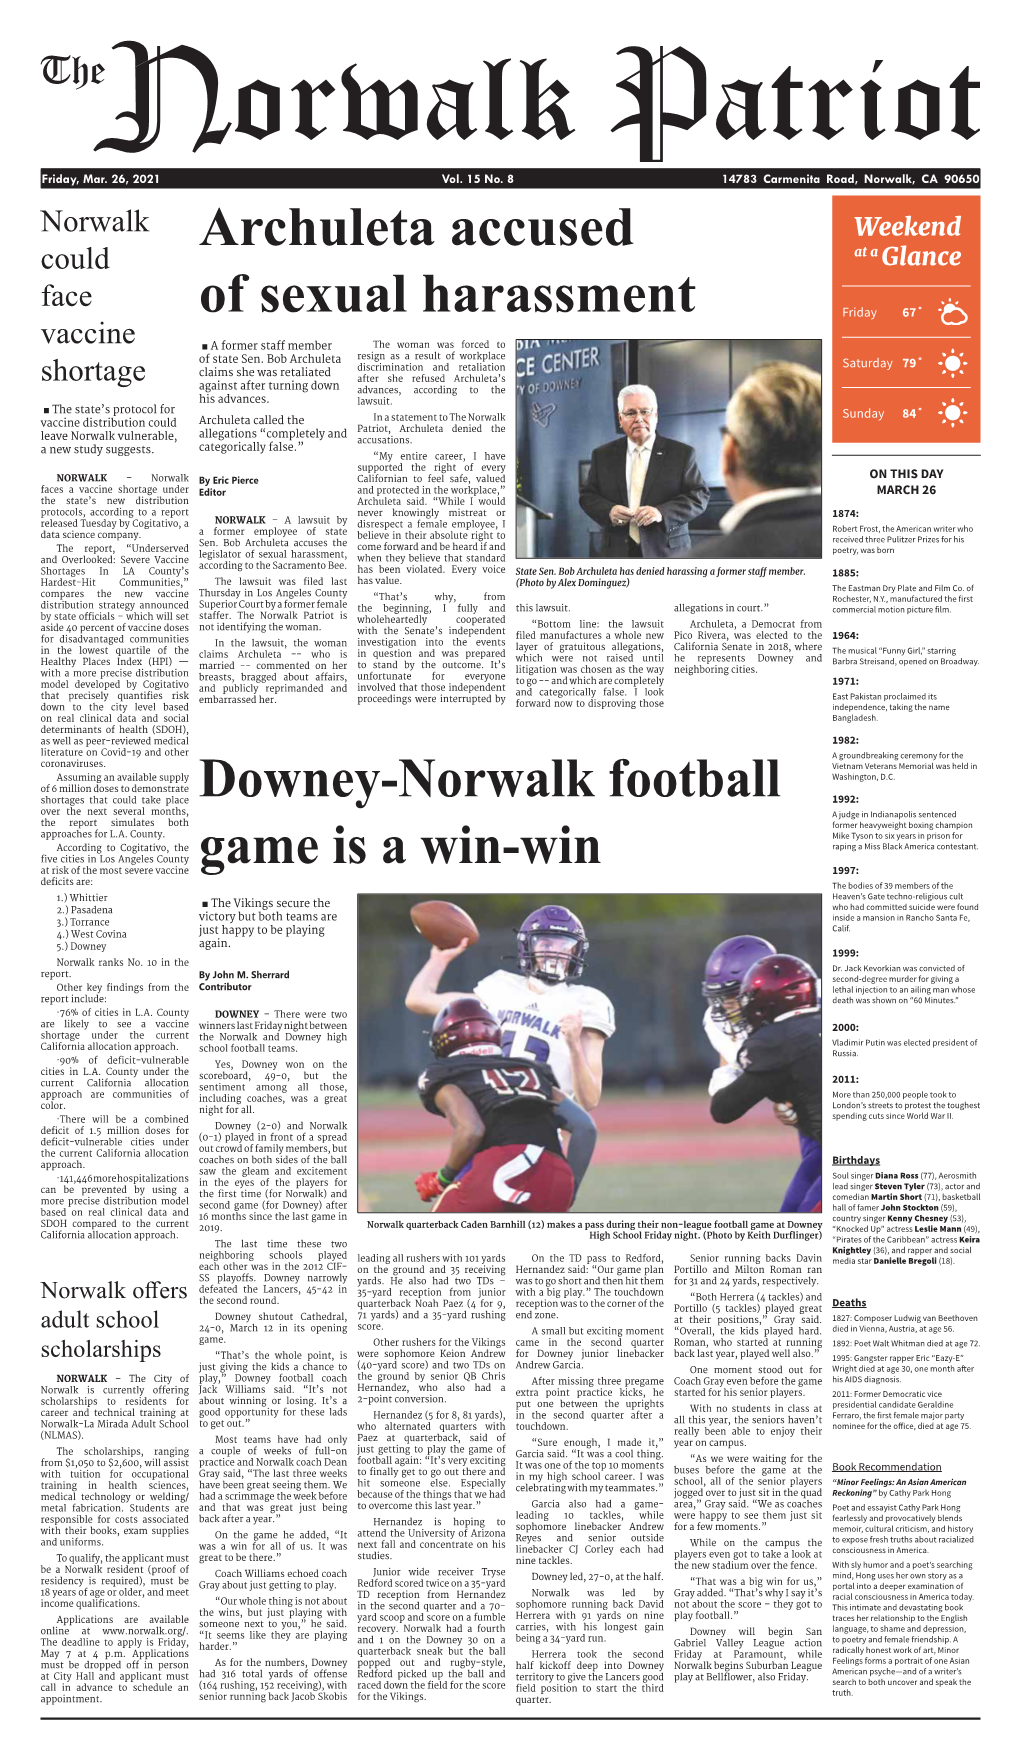 Downey-Norwalk Football Game Is a Win-Win Archuleta Accused Of